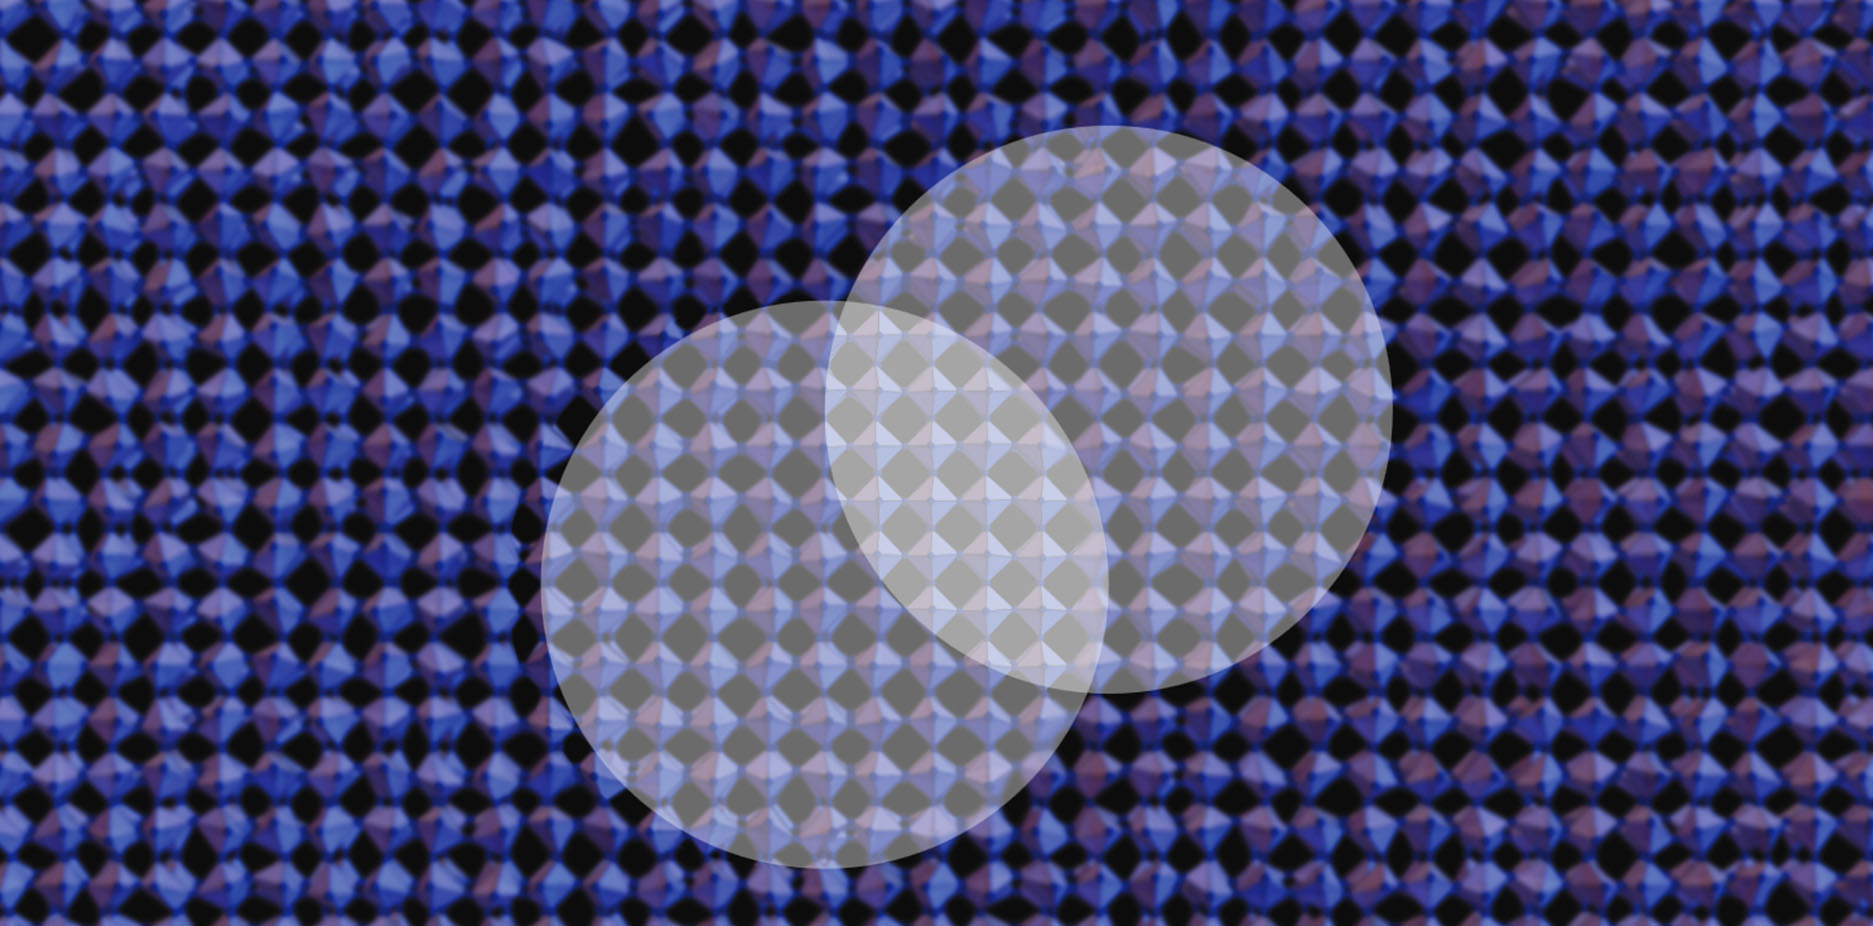 >excited electrons (at the centre of the image) can straighten out the skewed crystal lattice of perovskite nanocrystals